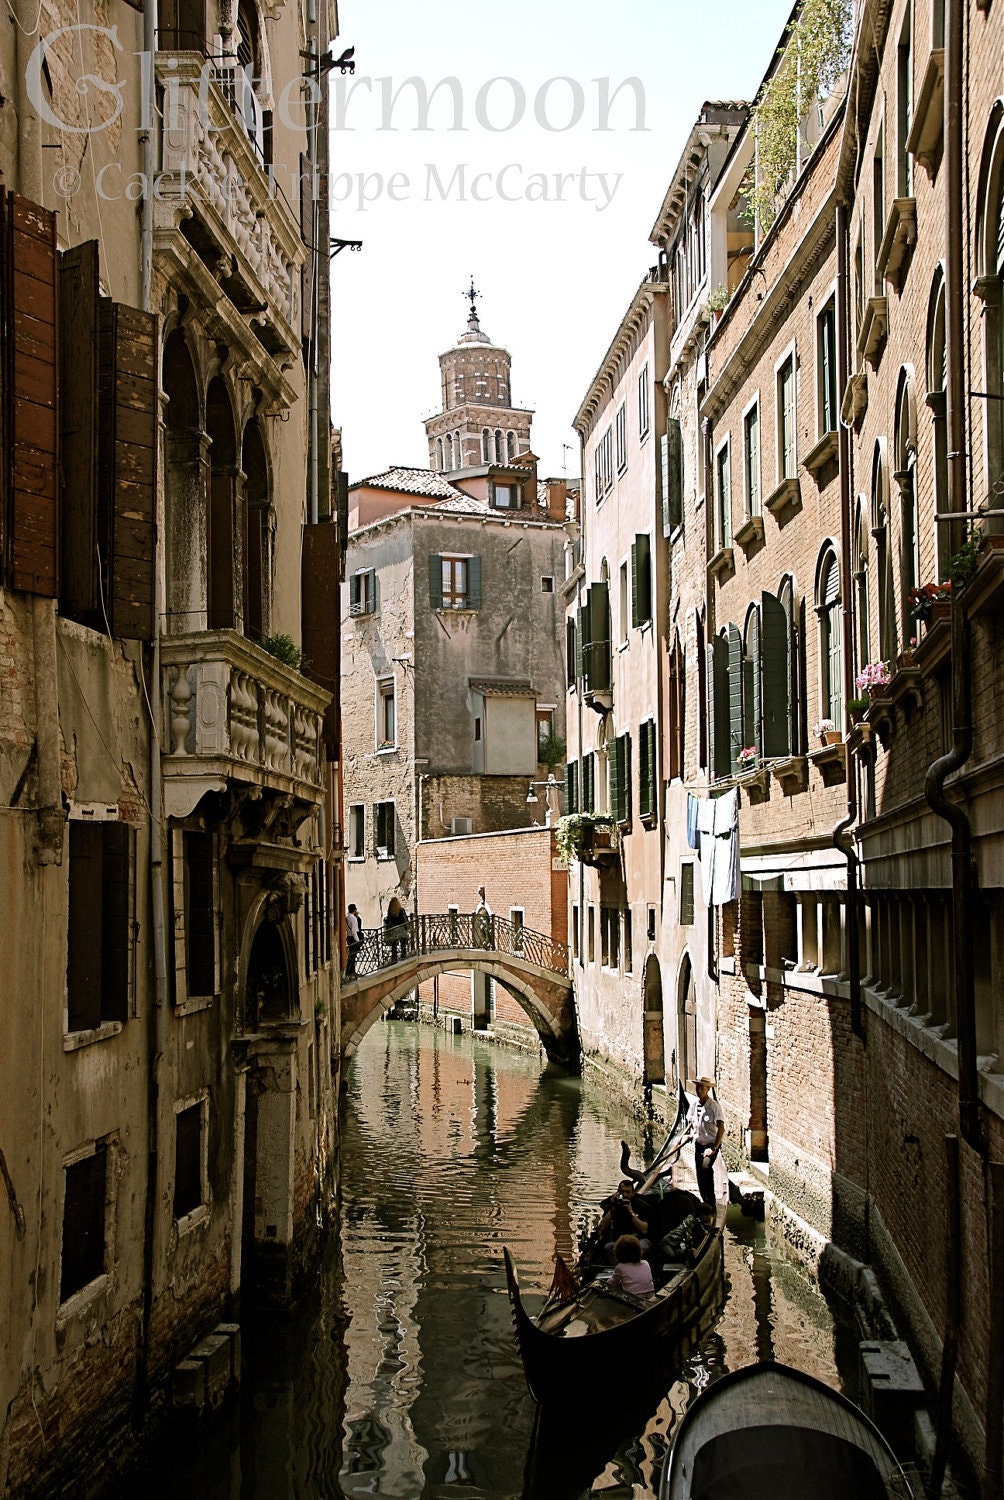 Serene Journey in Venice: 5x7 Matted Photographic Print - GlittermoonCards